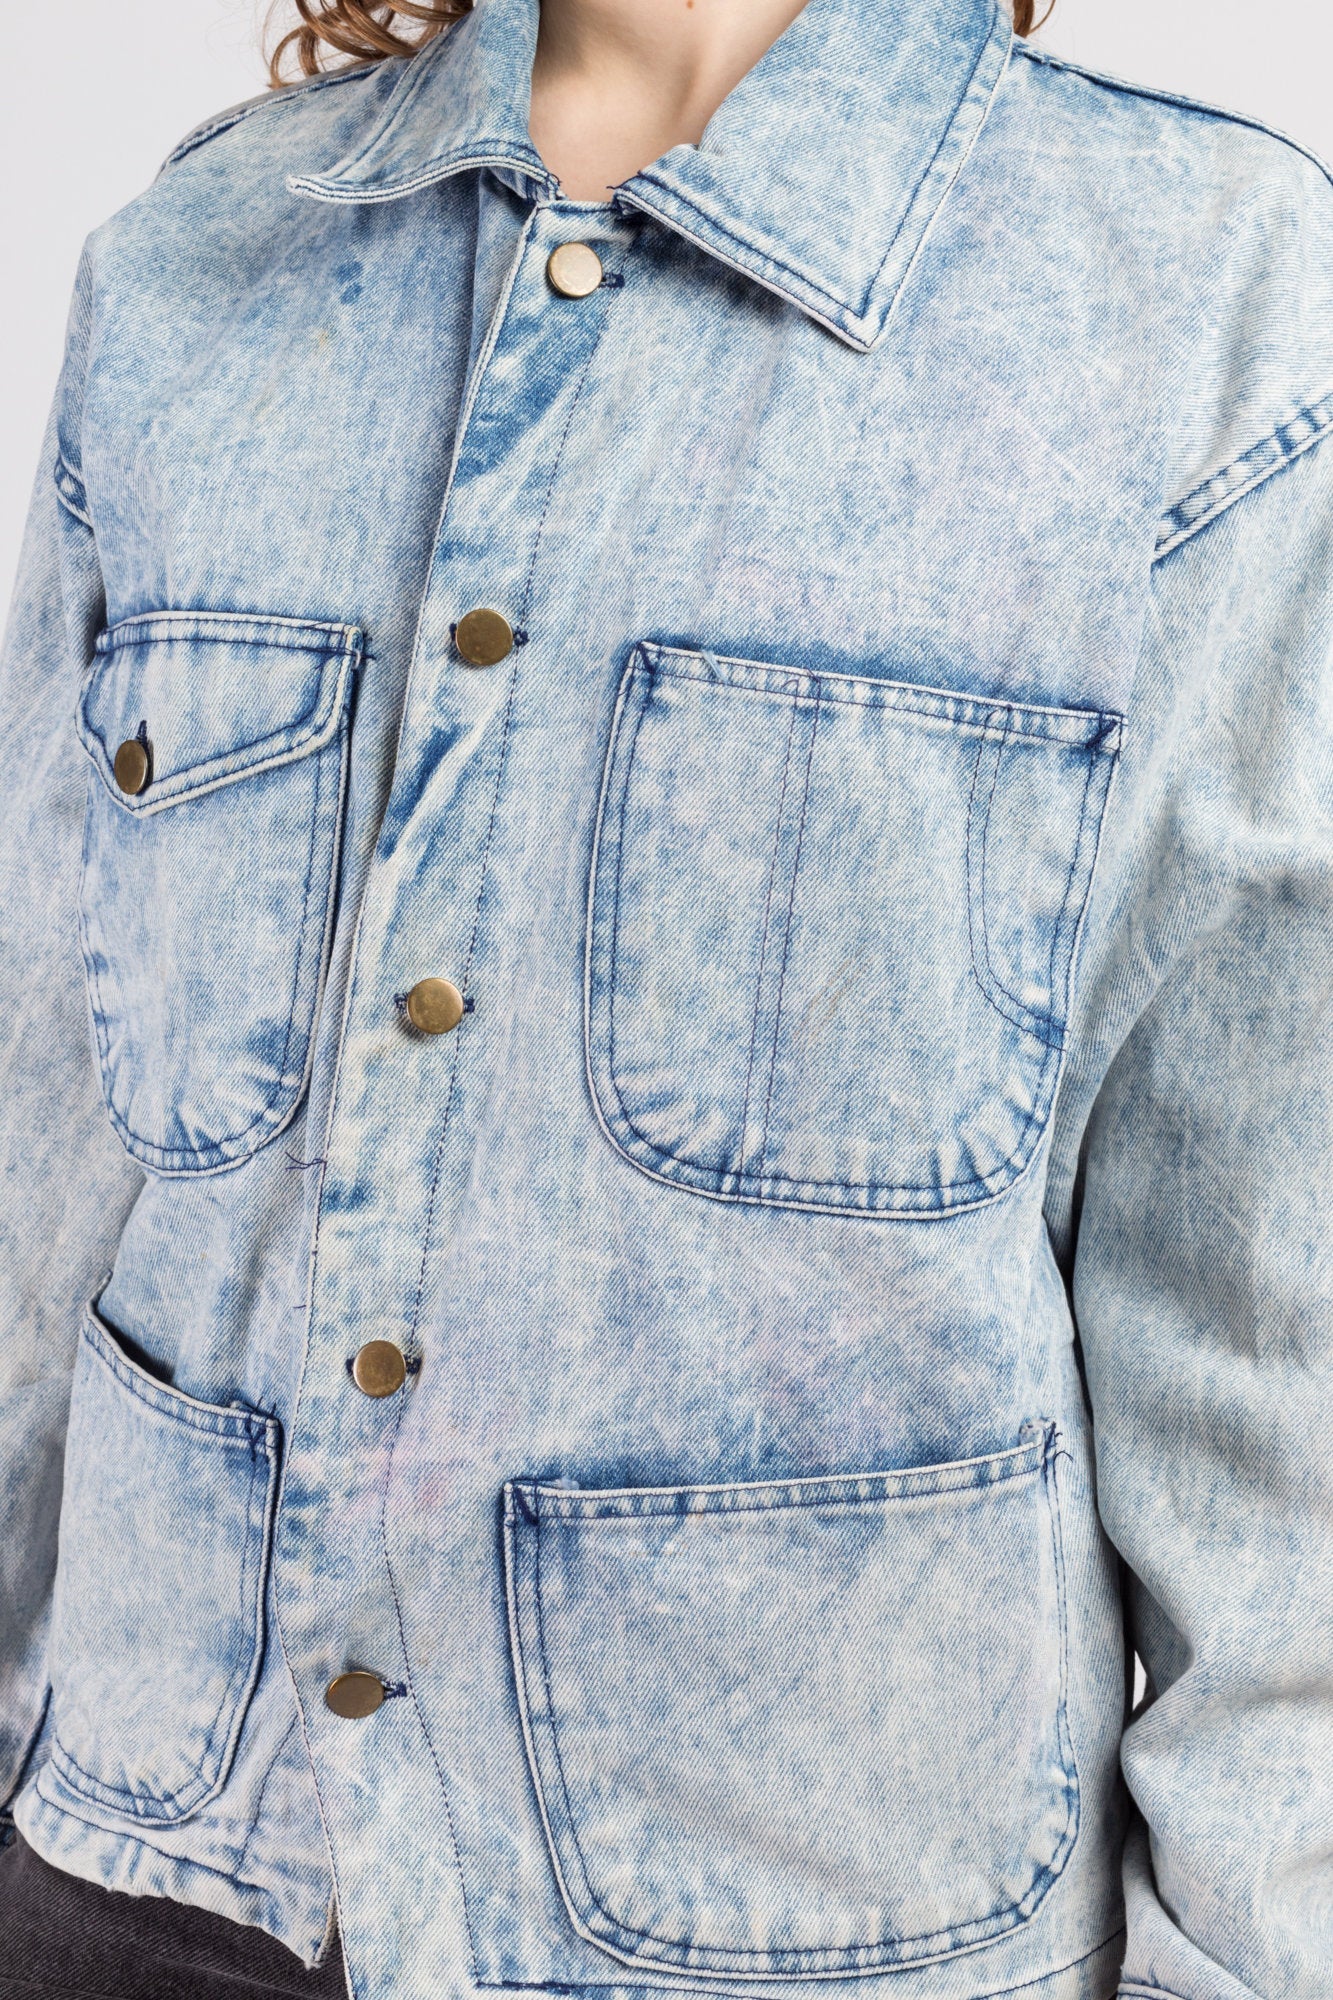 80s Acid Wash Butterfly Painted Denim Jacket - Small